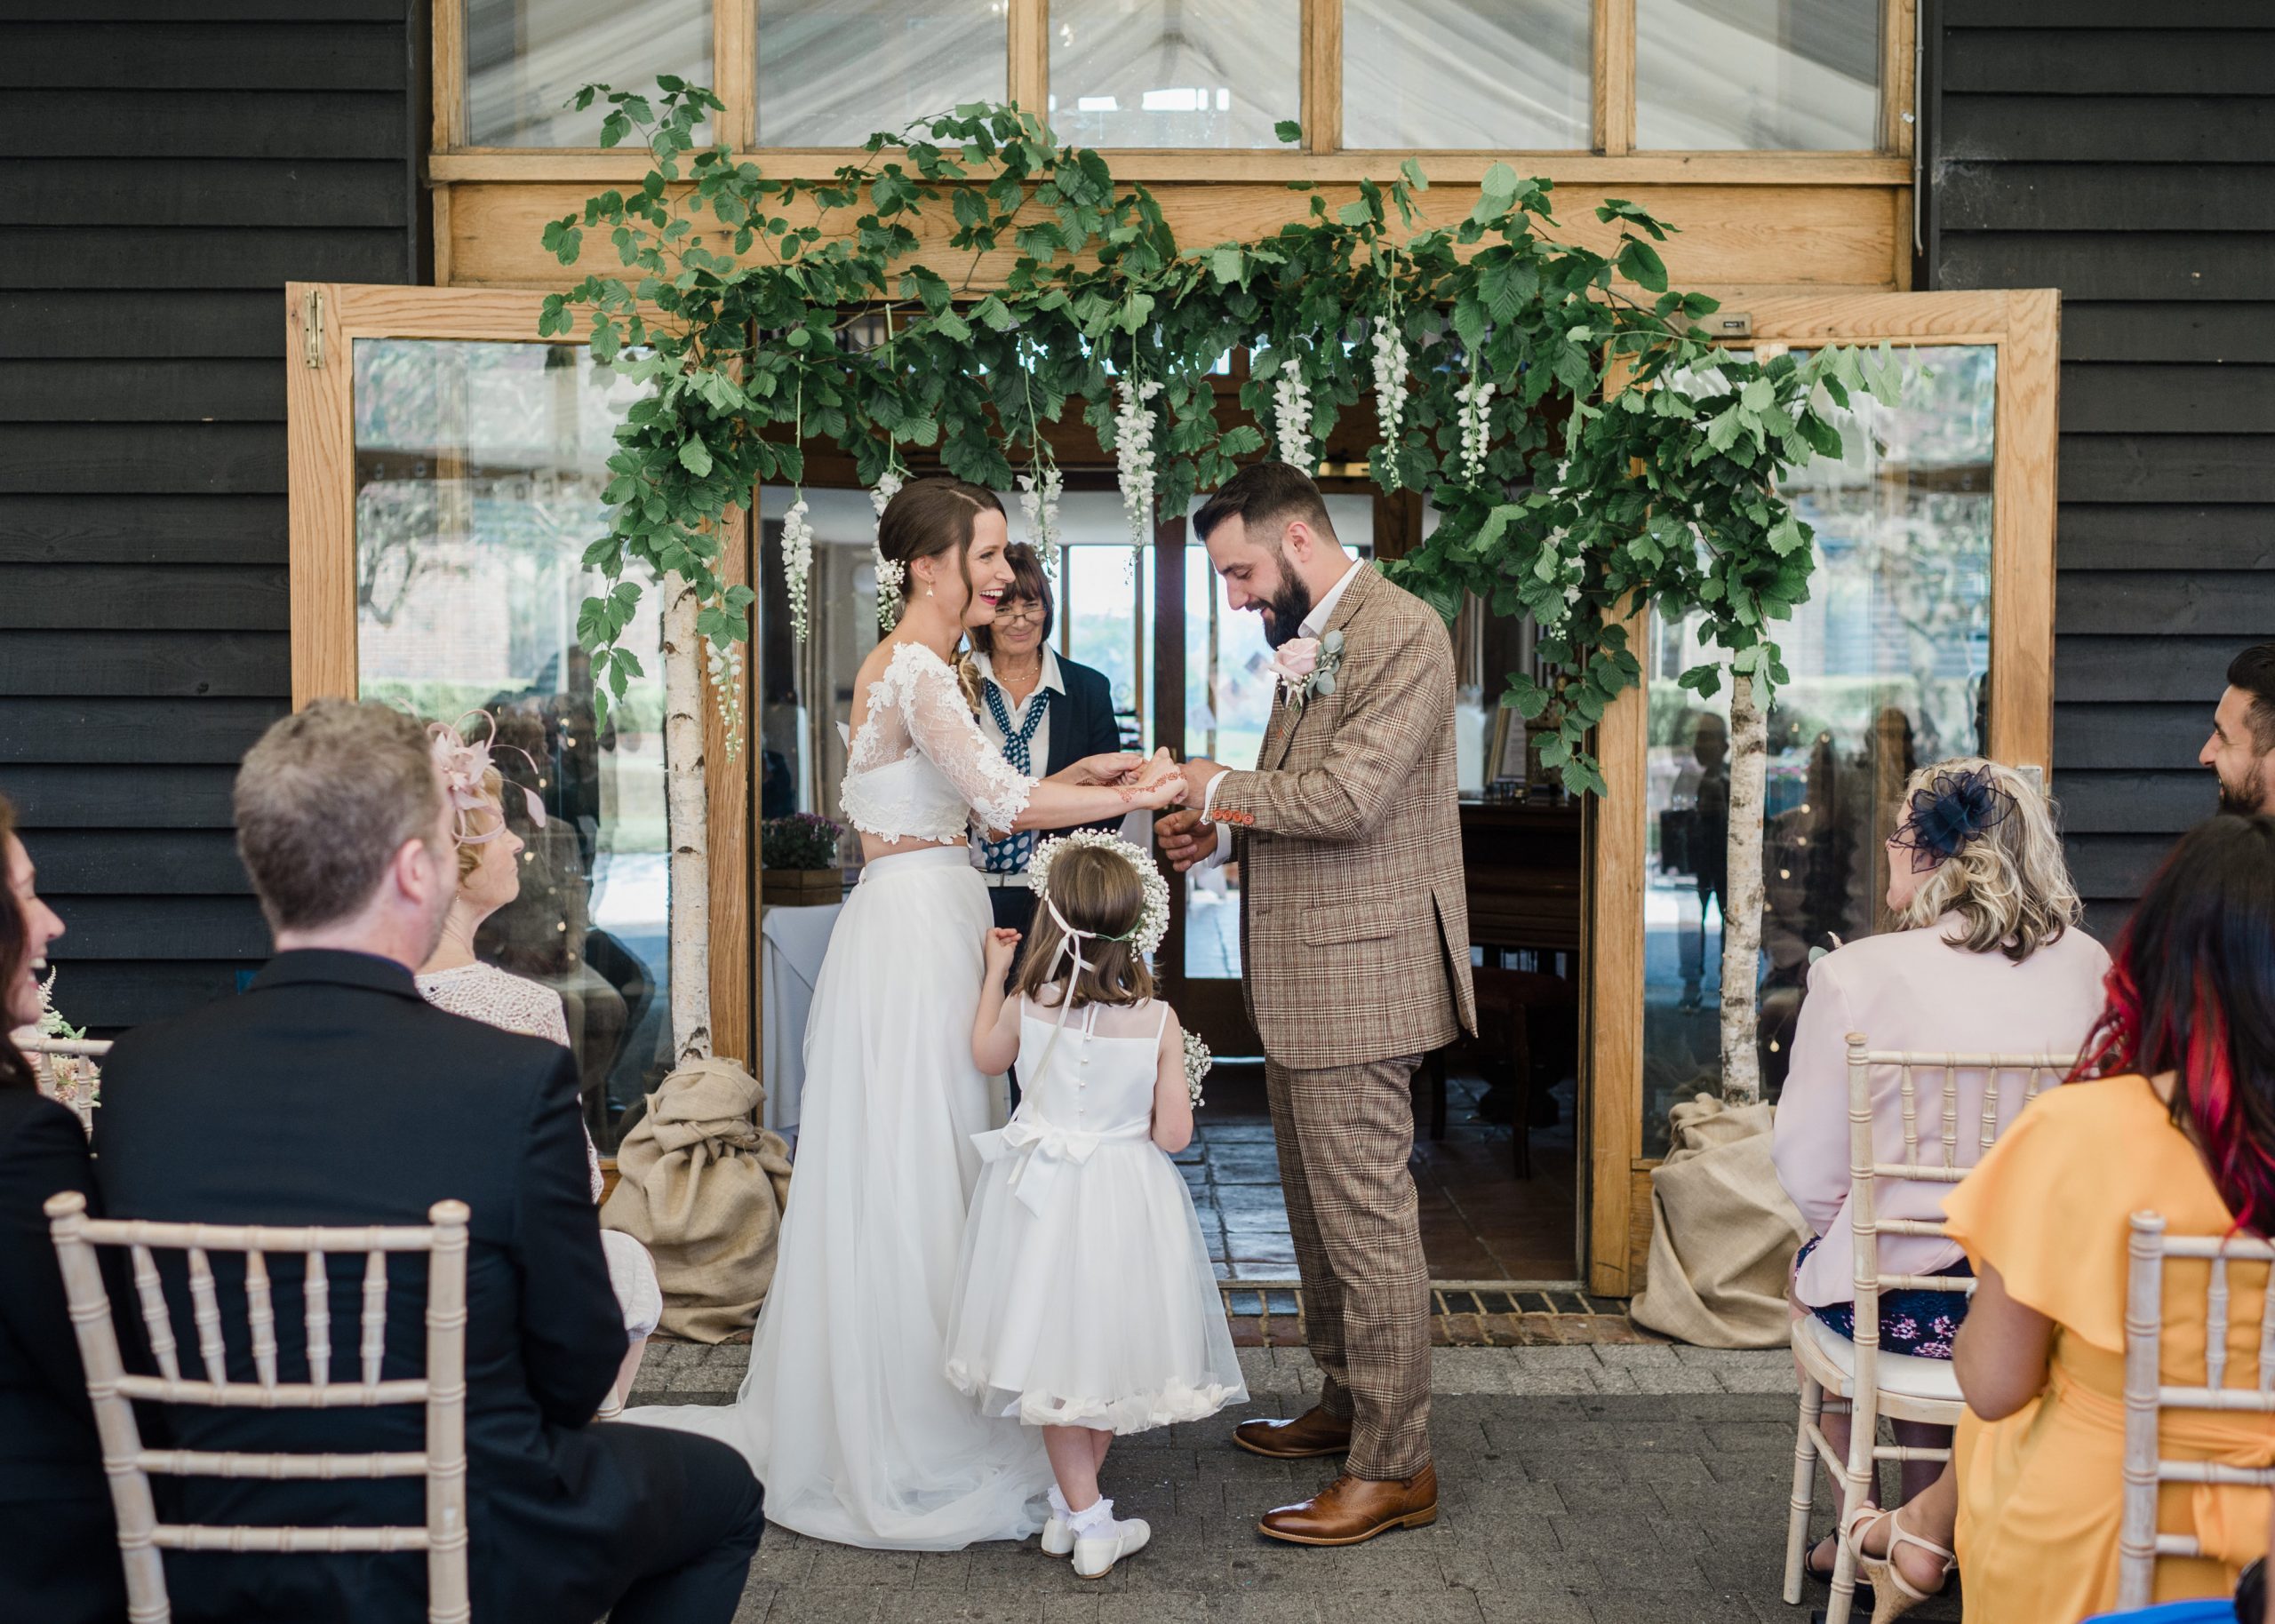 Gemma and Aaron exchanging rings at their wedding ceremony